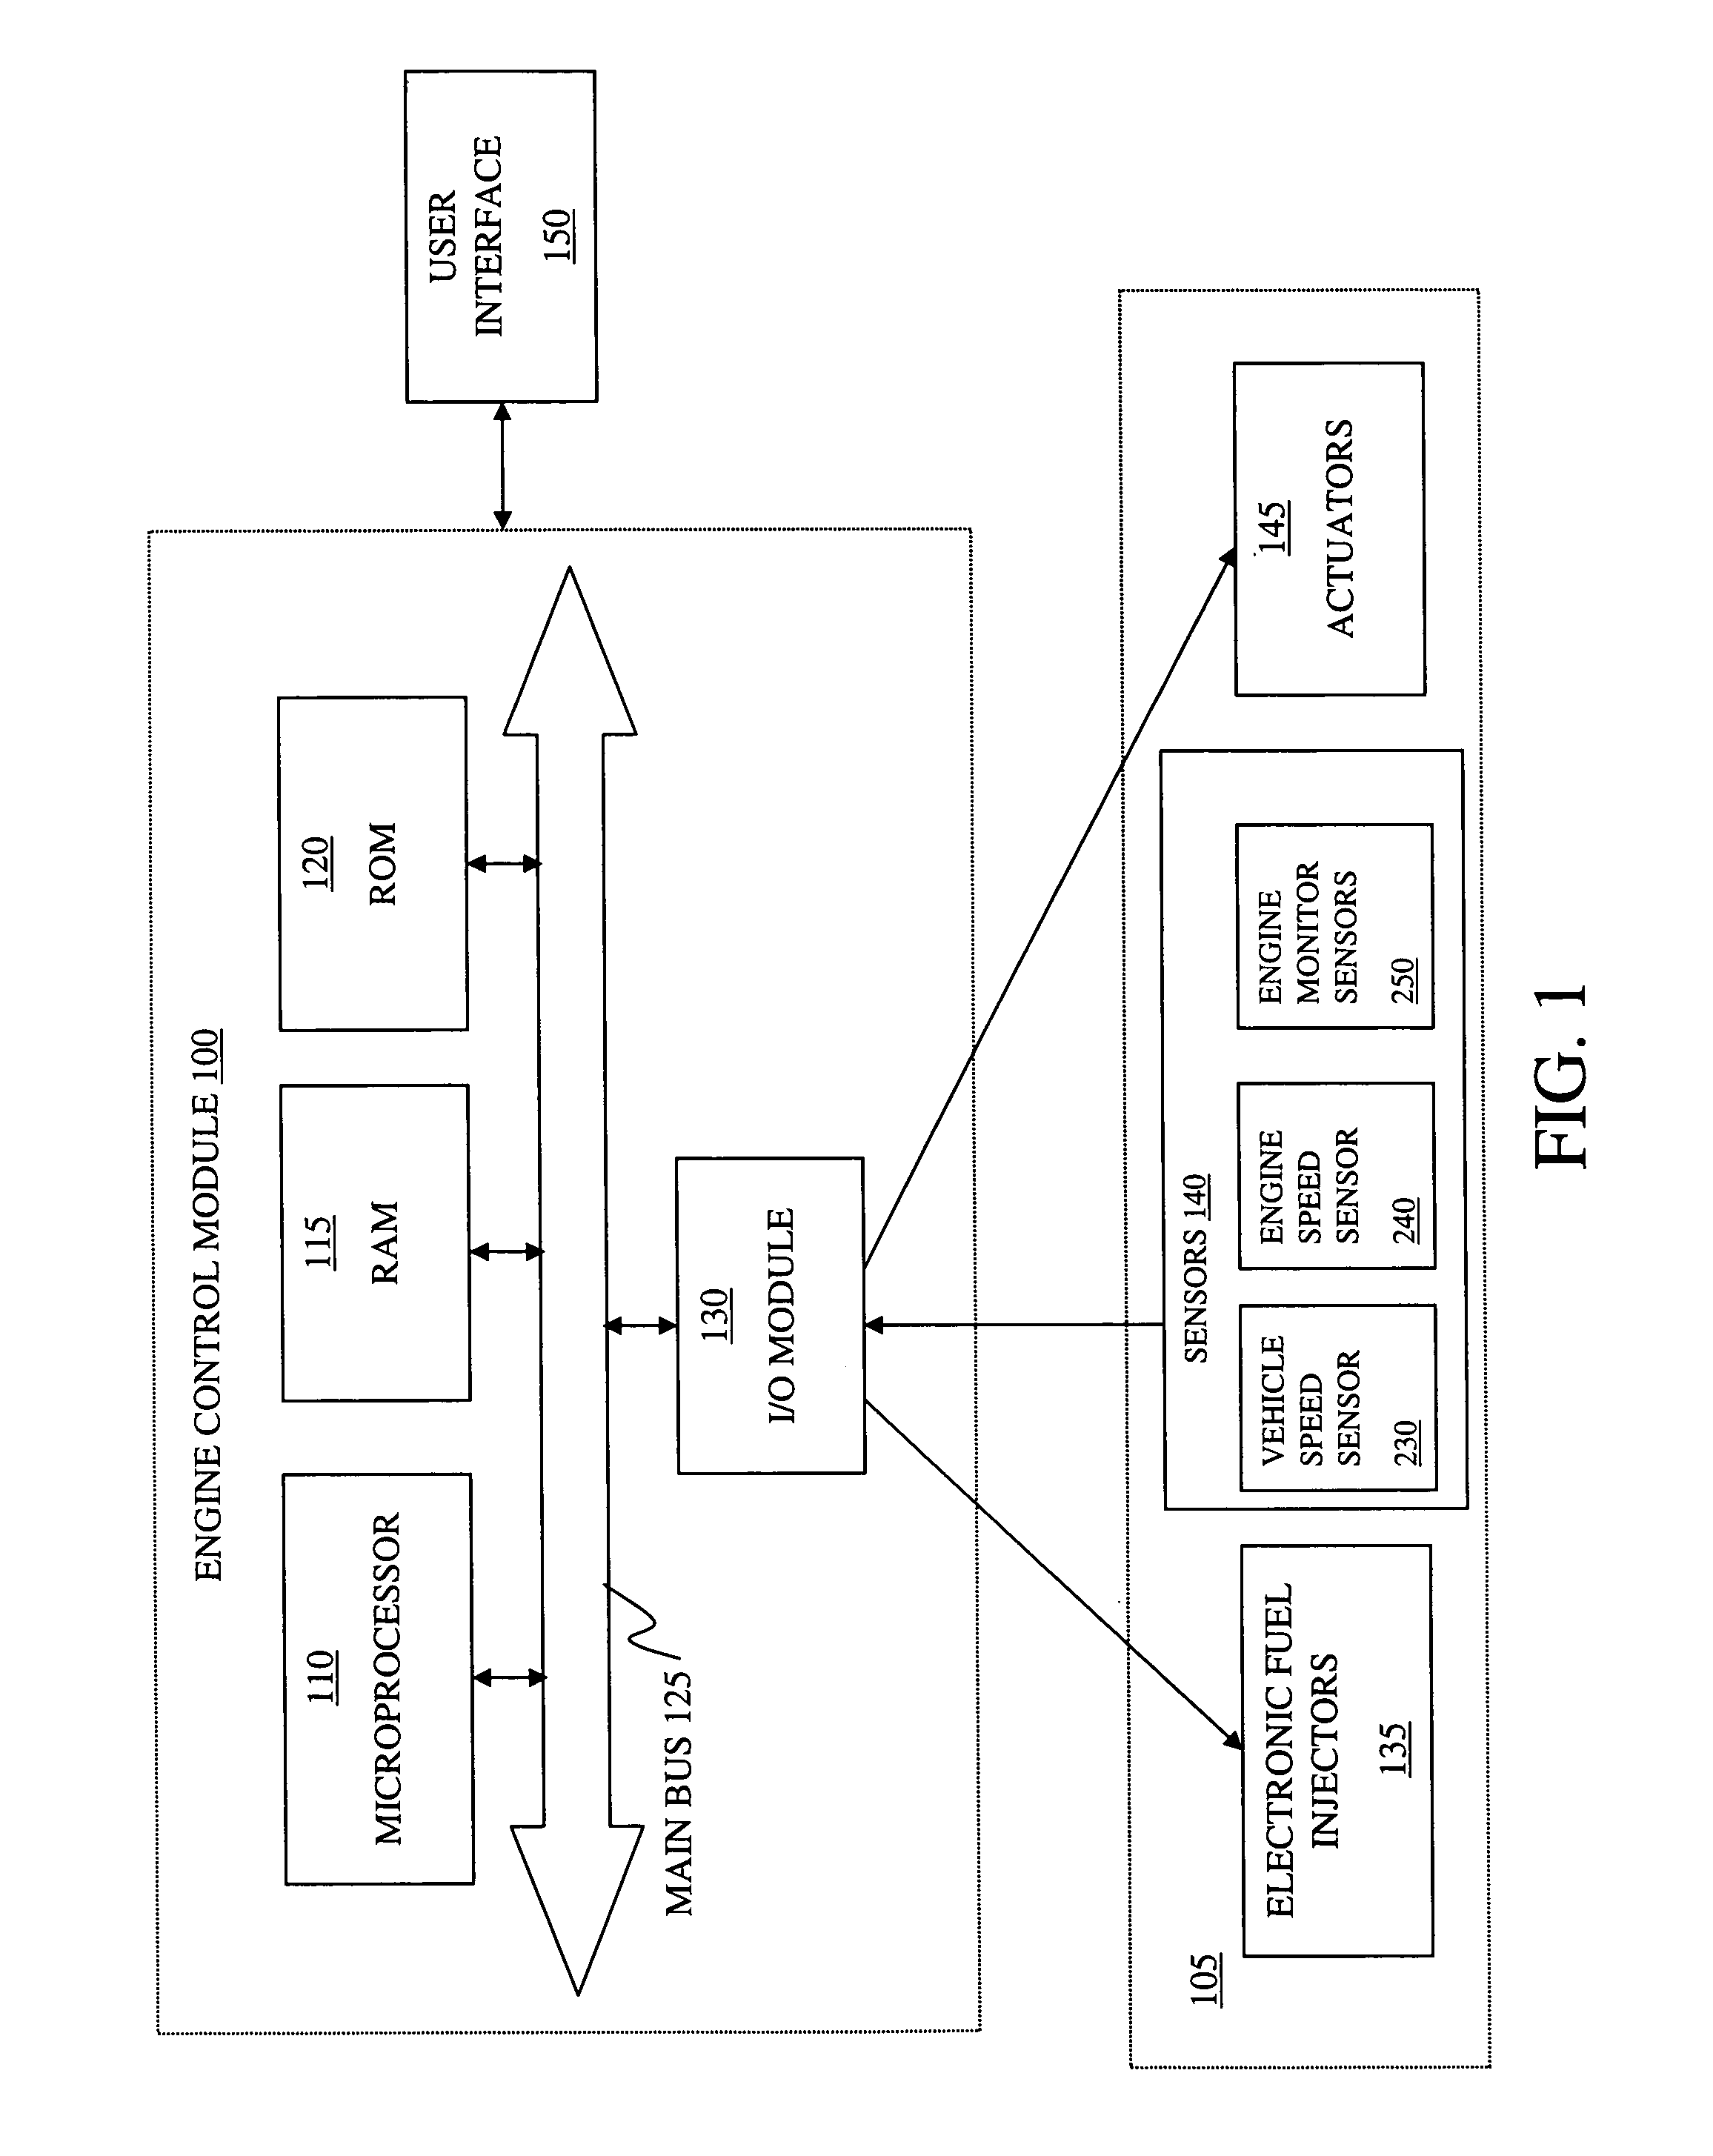 Load-variable engine control system